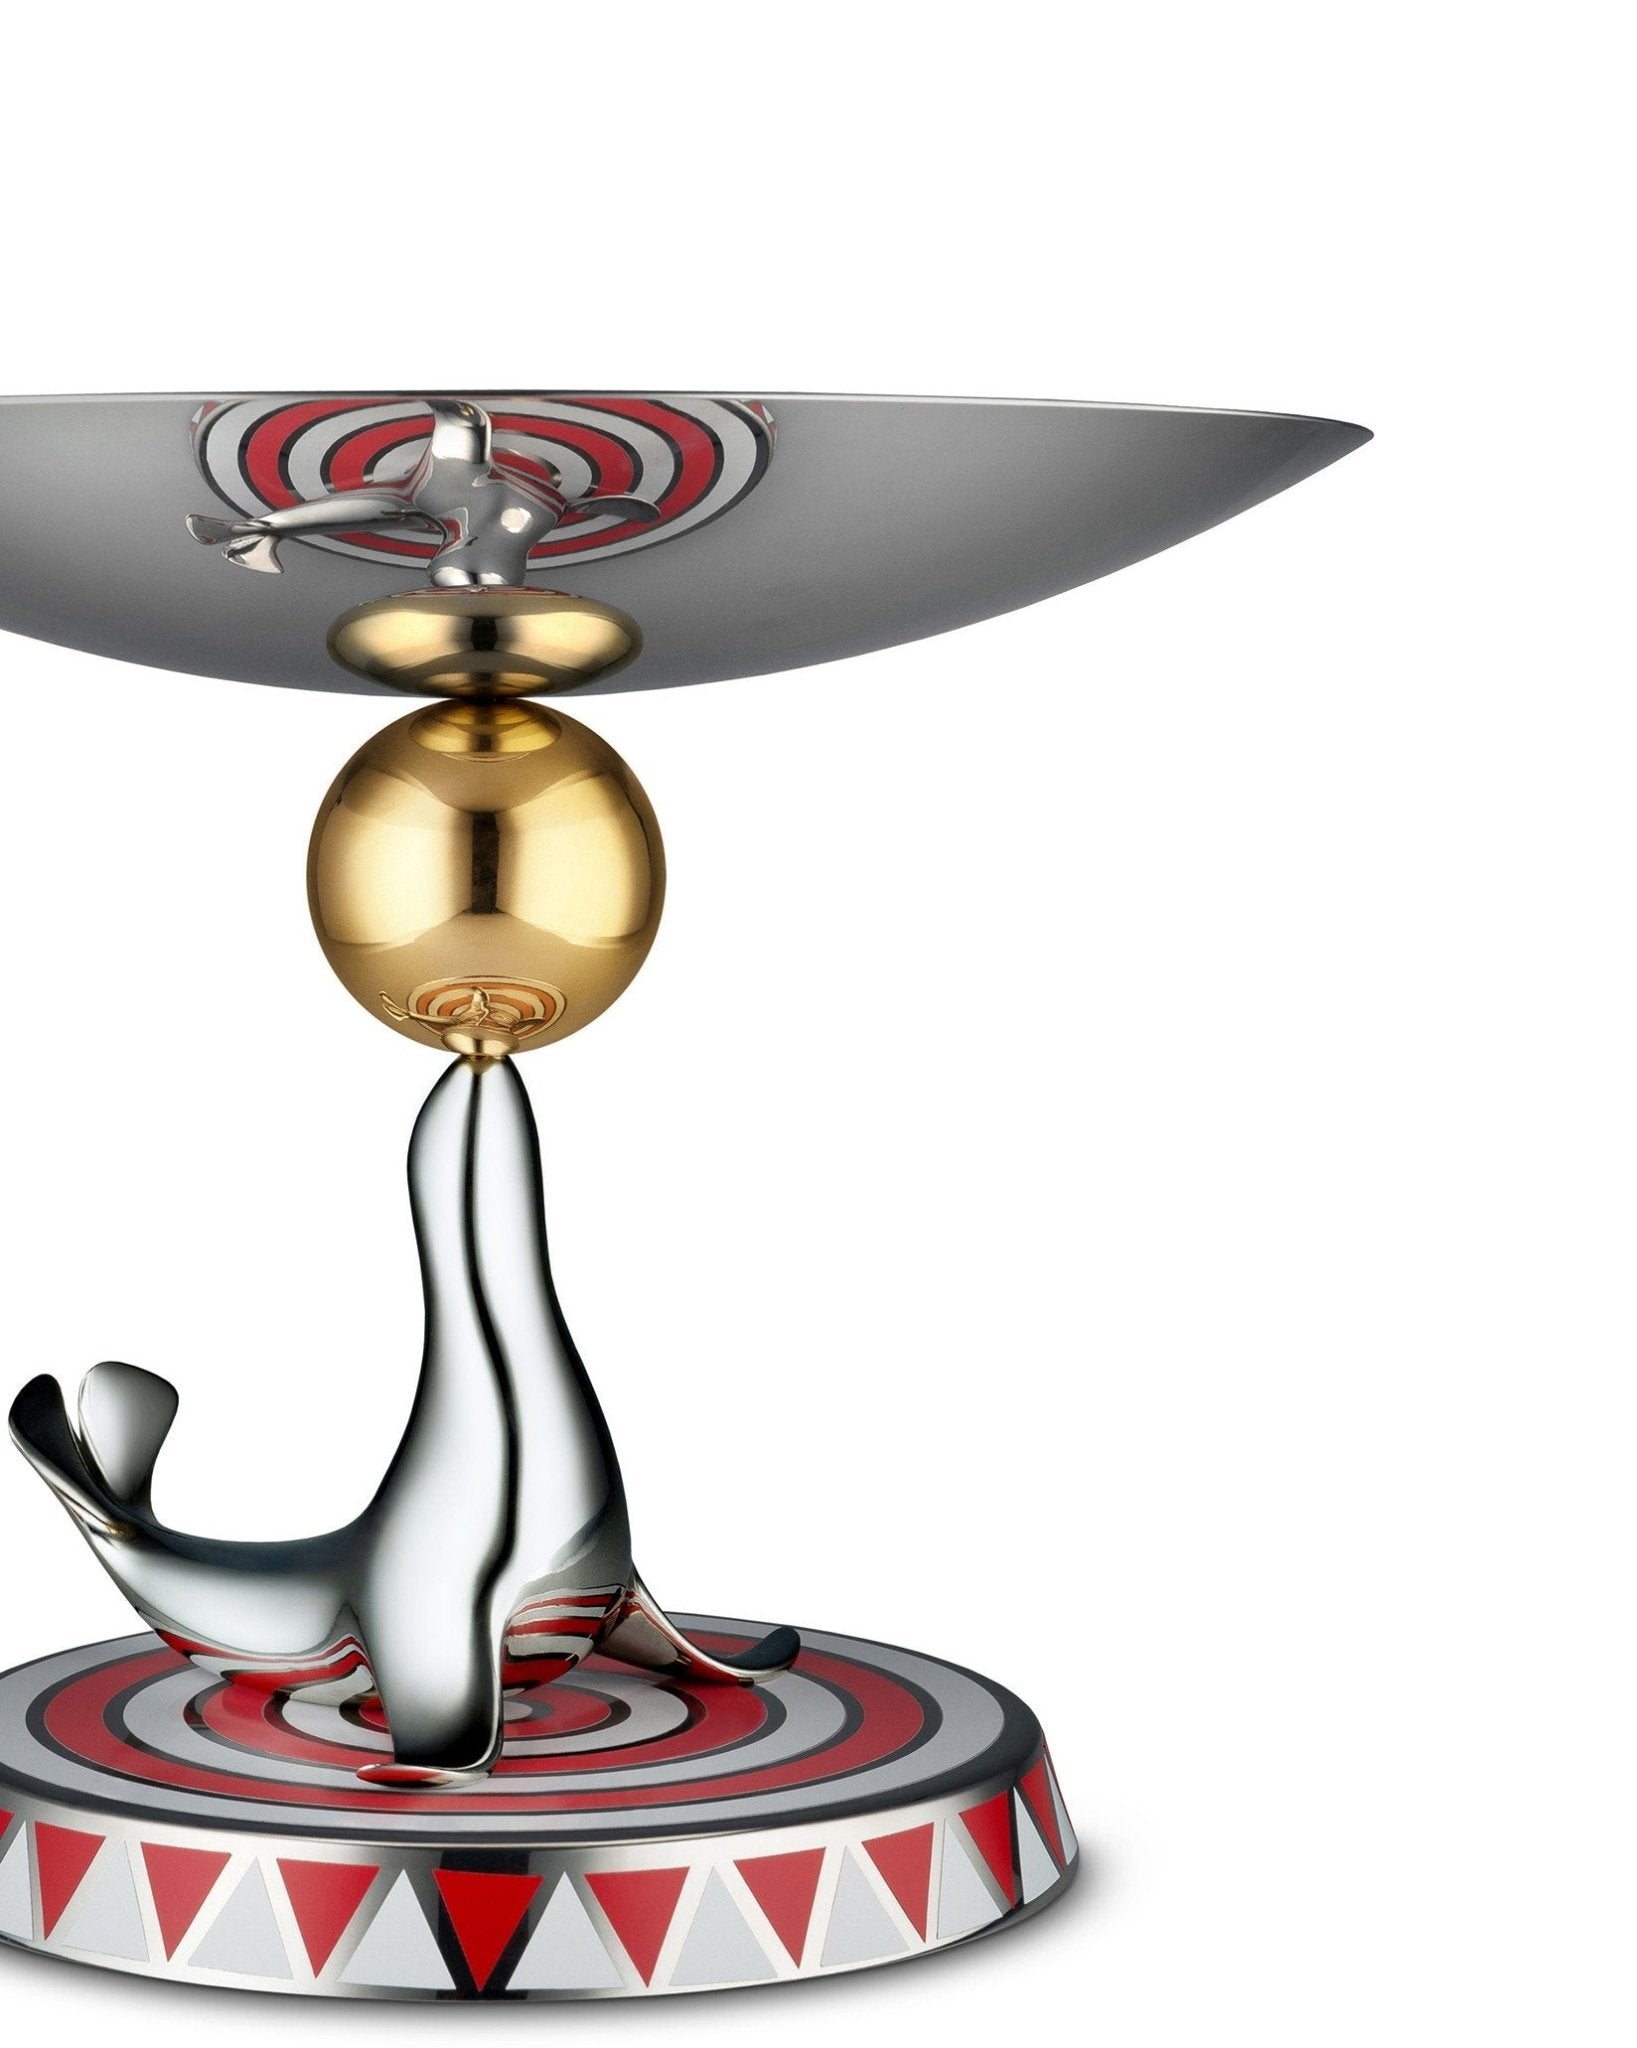 Alessi Cake Stand The Seal Circus Limited Edition | Panik Design